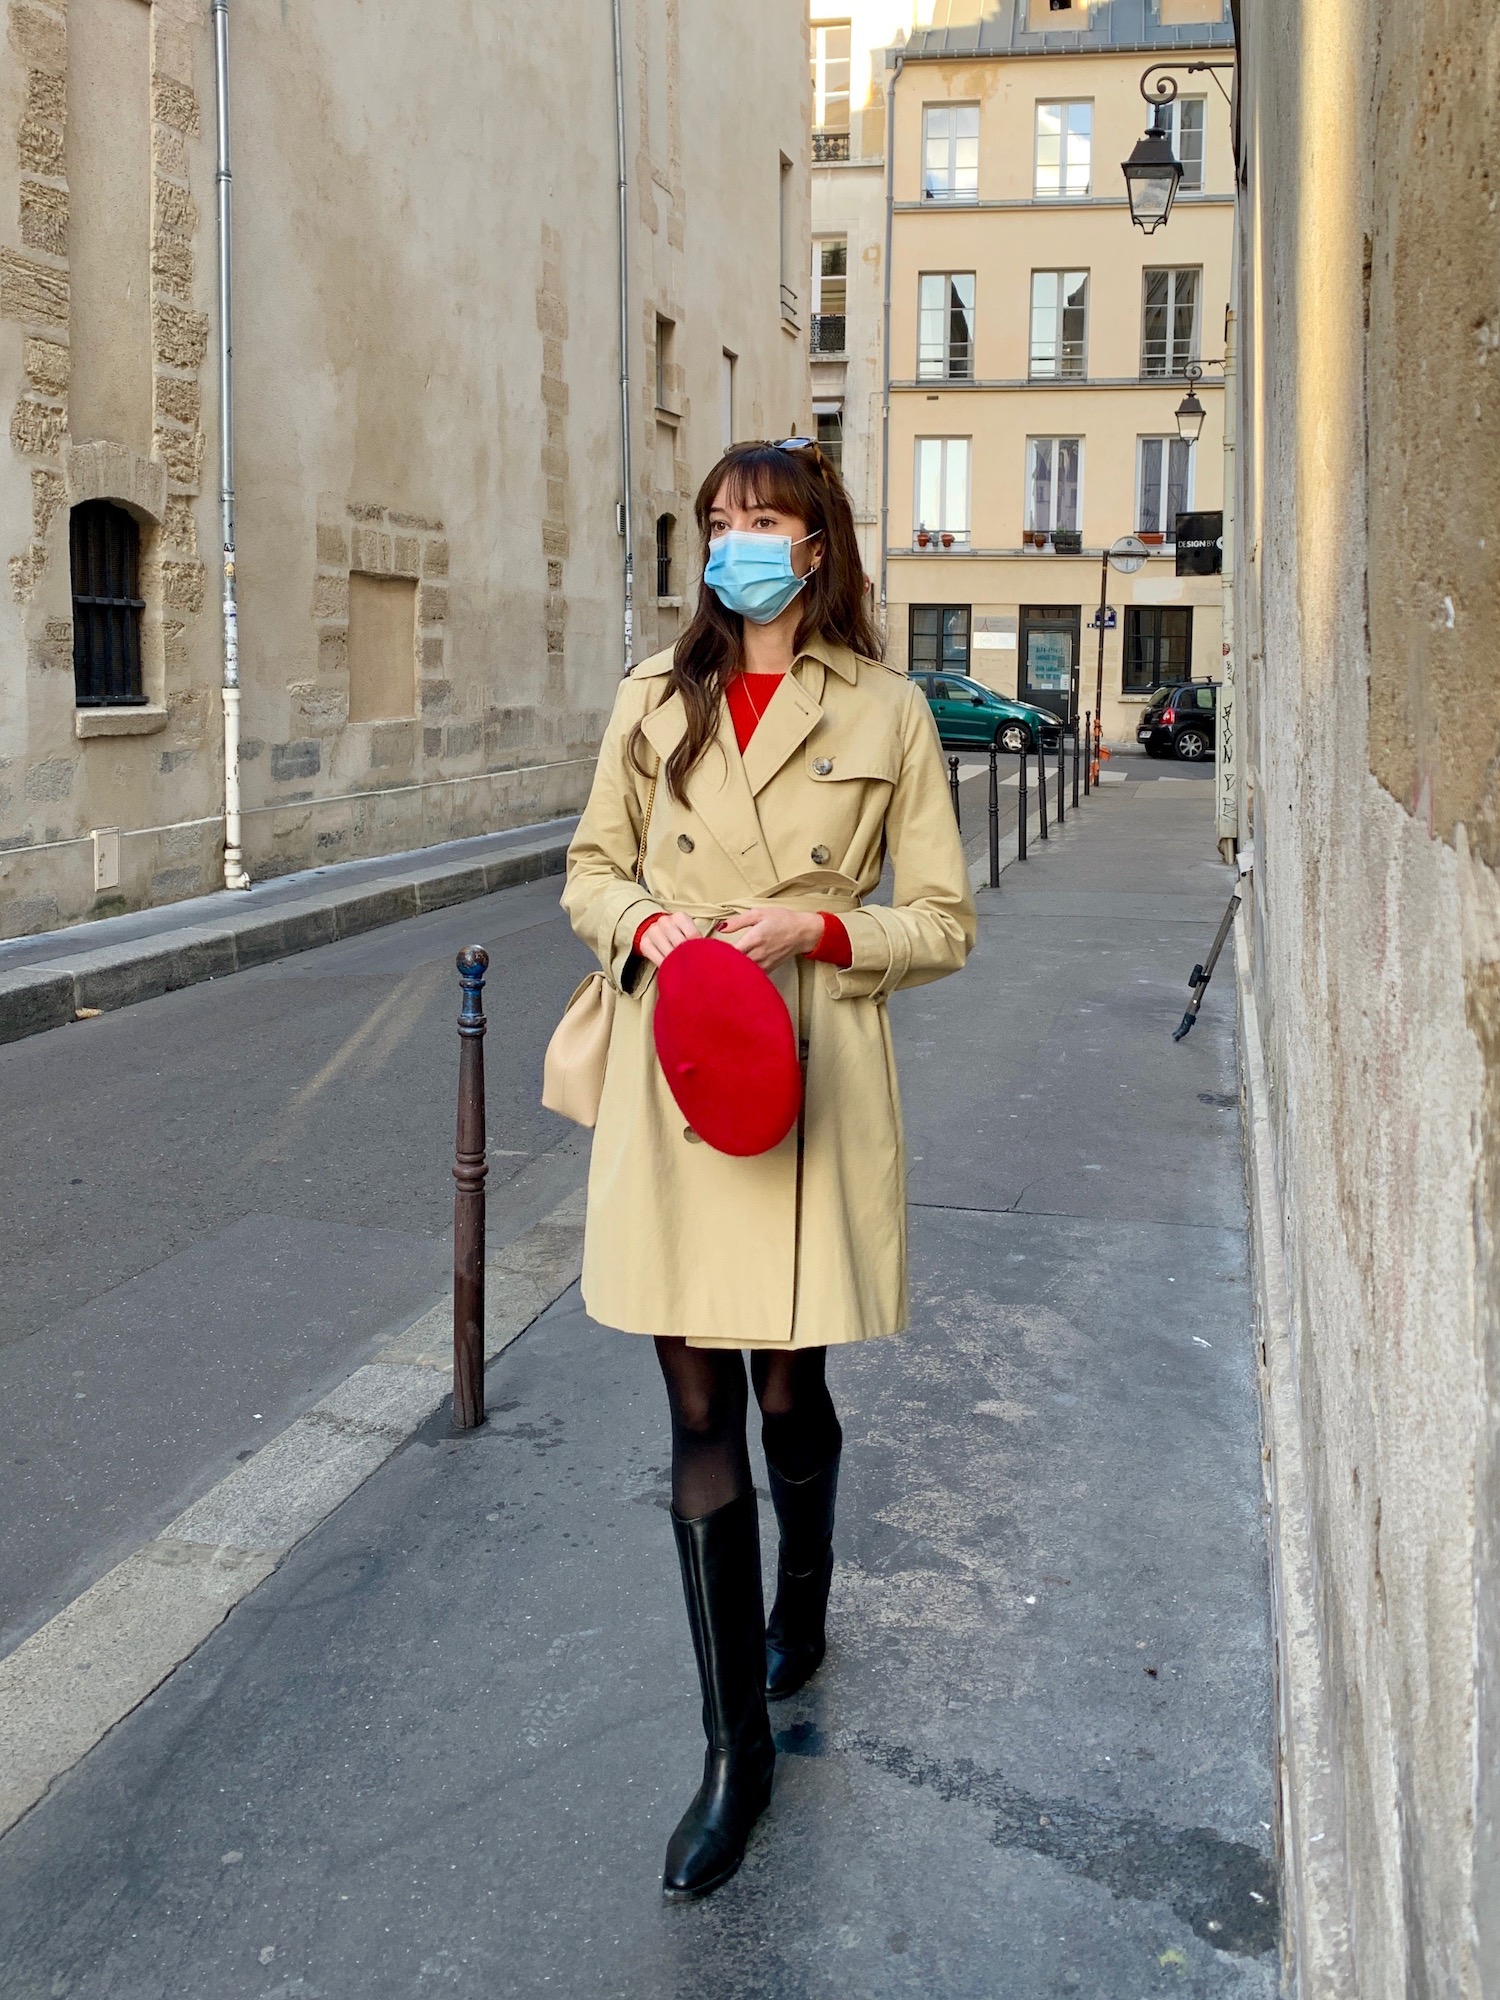 Netflix Emily in Paris Thoughts from a Real American Girl in Paris - wearing a red beret in Paris and an APC Trench Coat